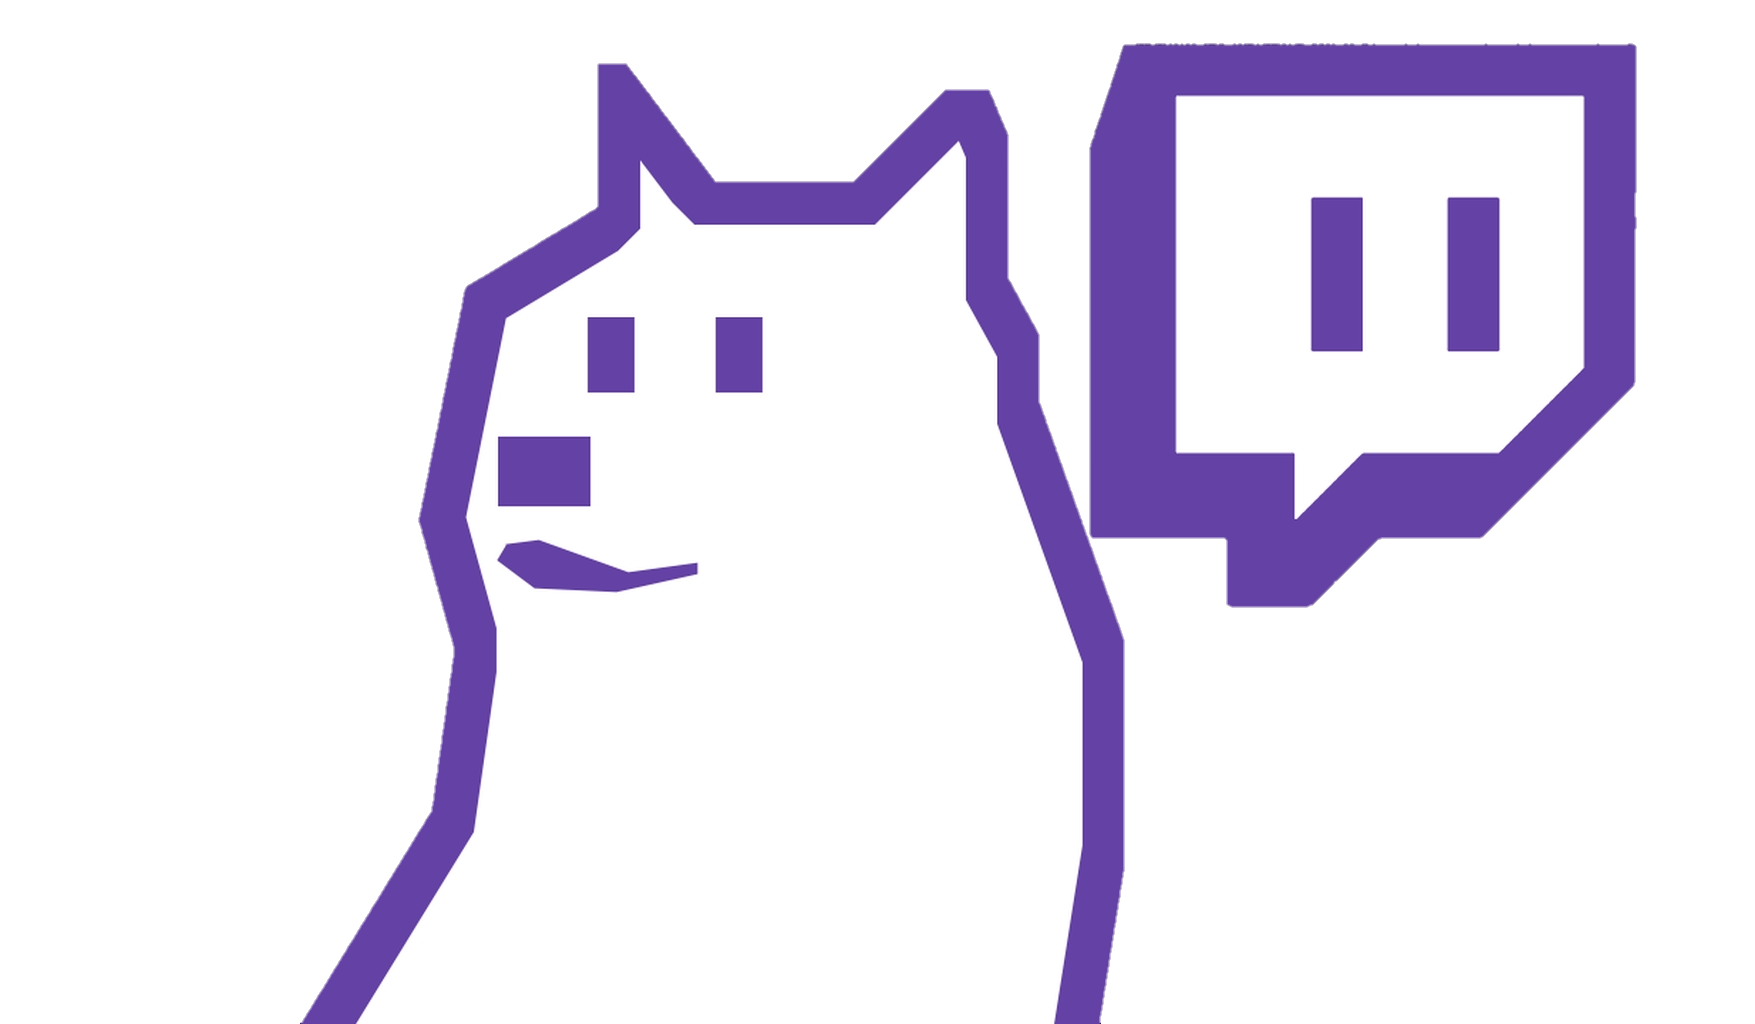 twitch-logo-png-from-pngfre-24